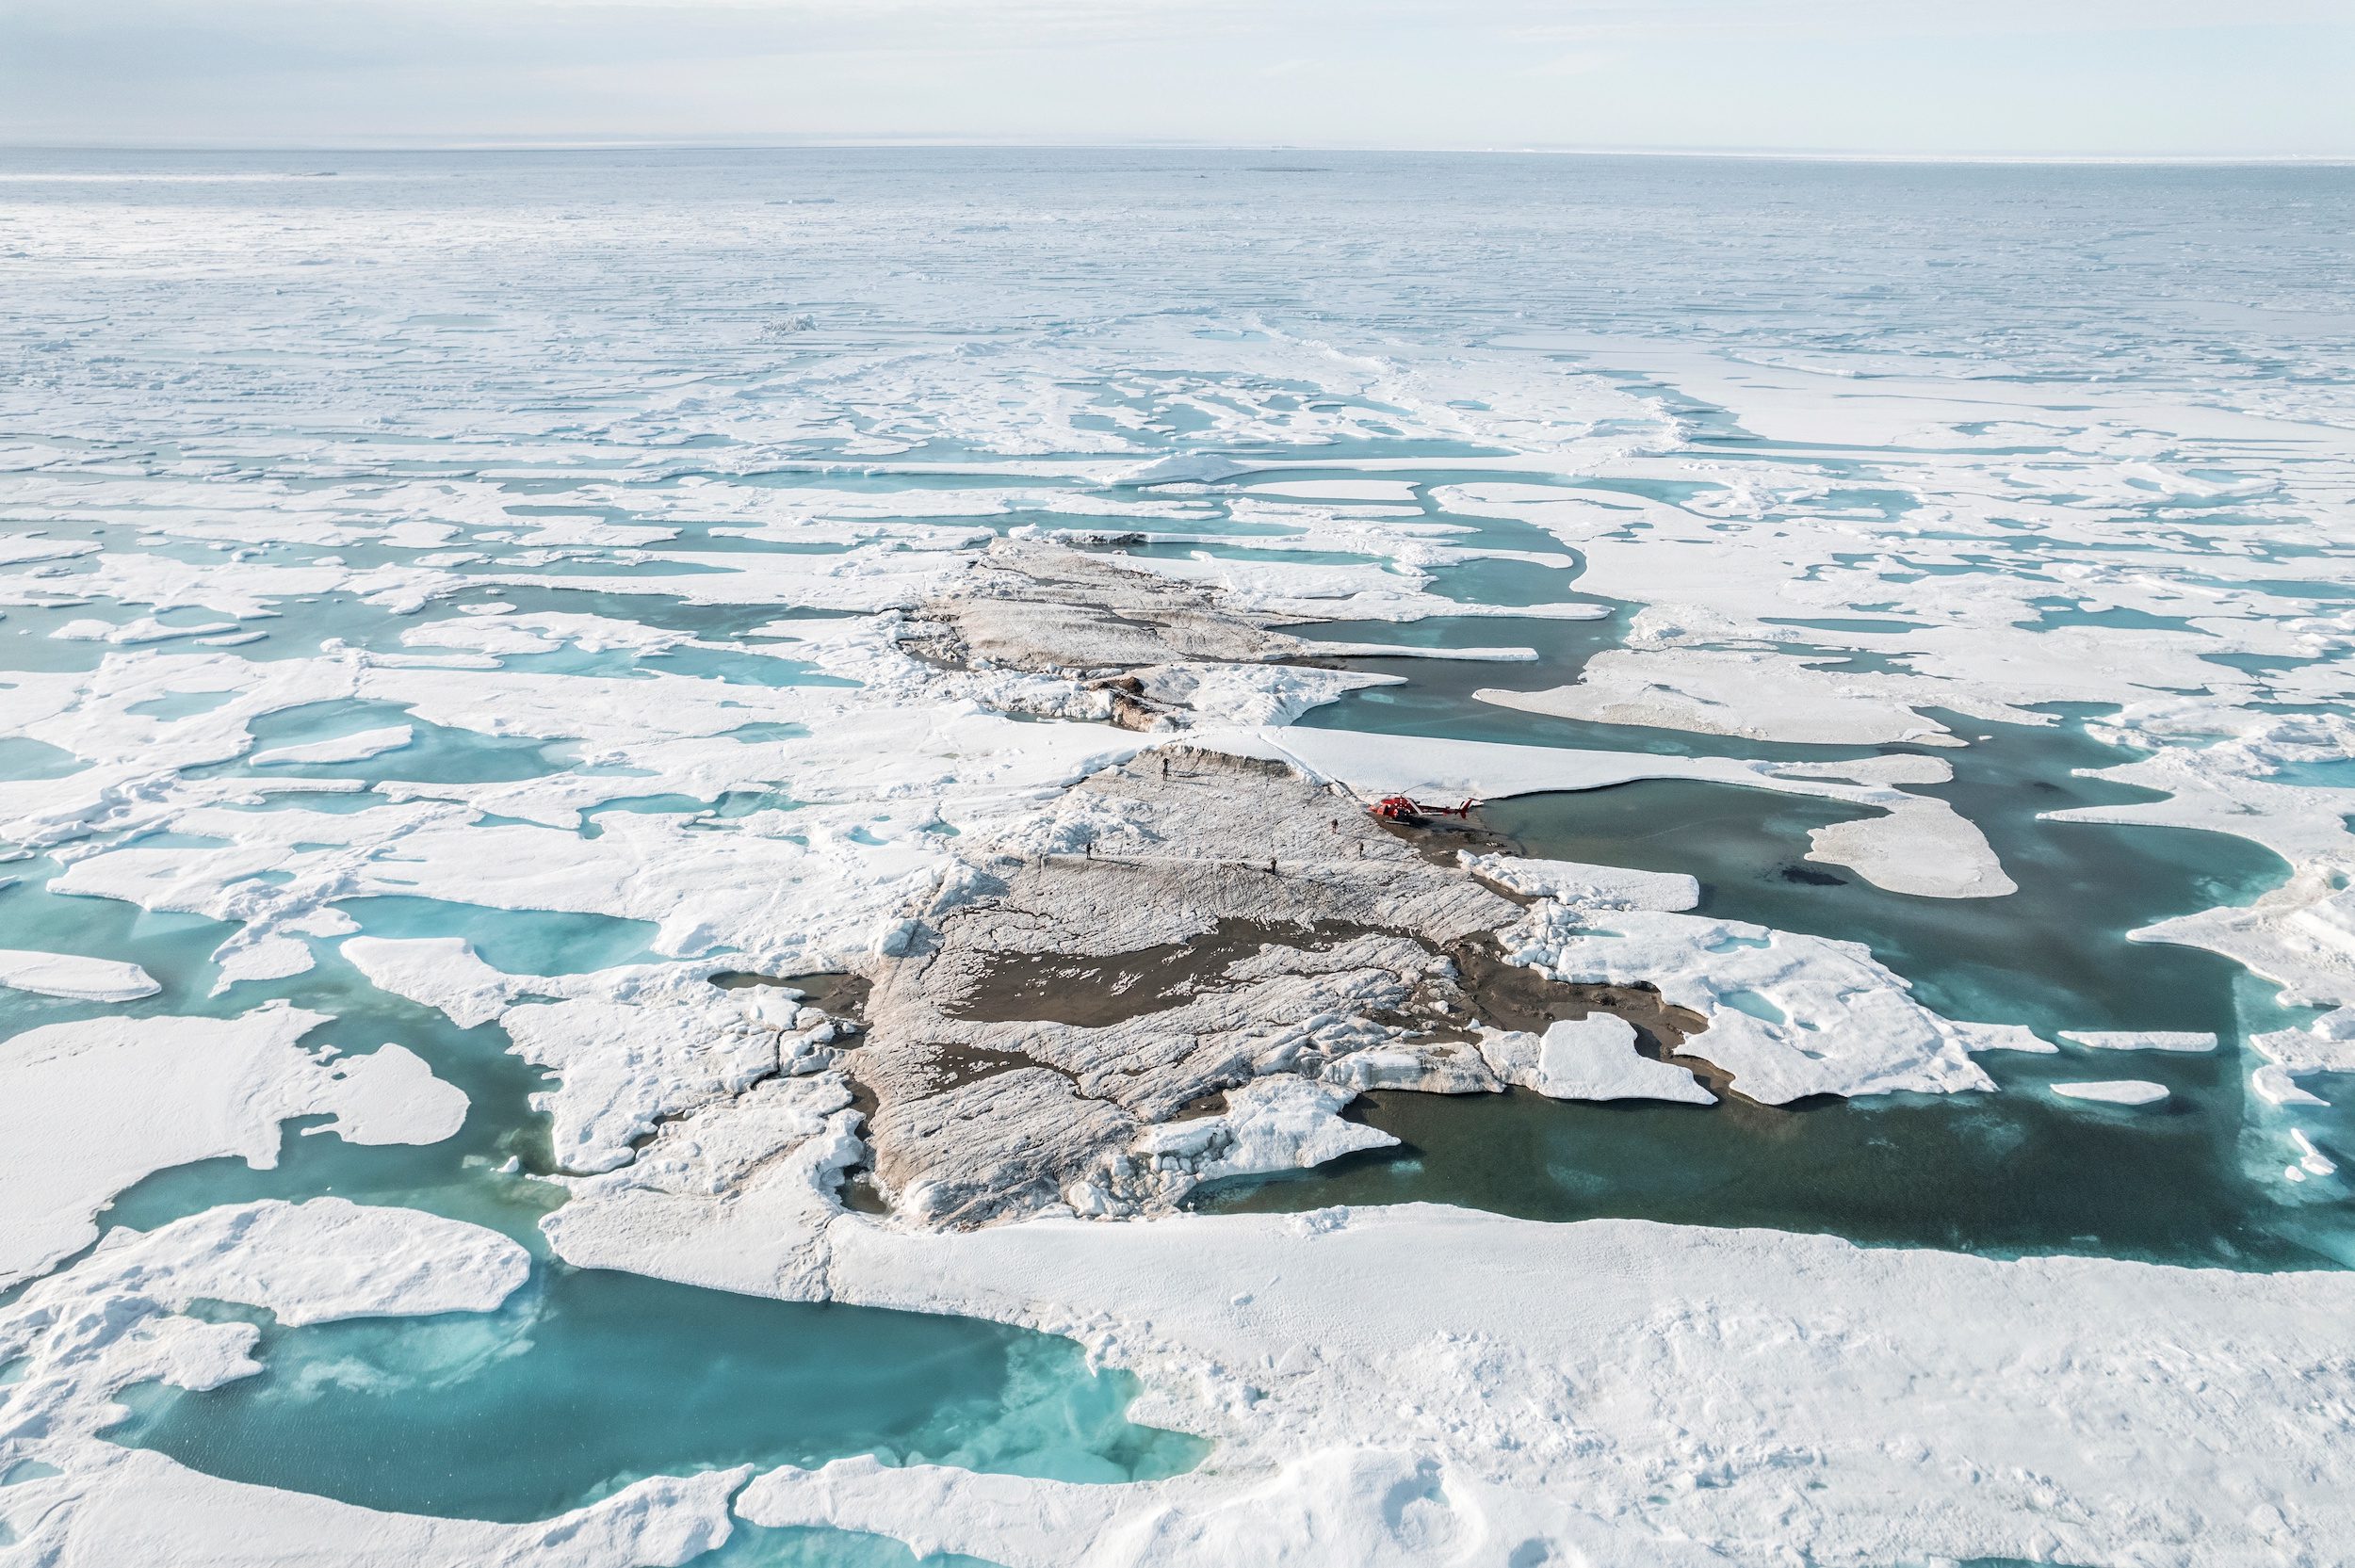 Greenland expedition discover 'world's northernmost island'